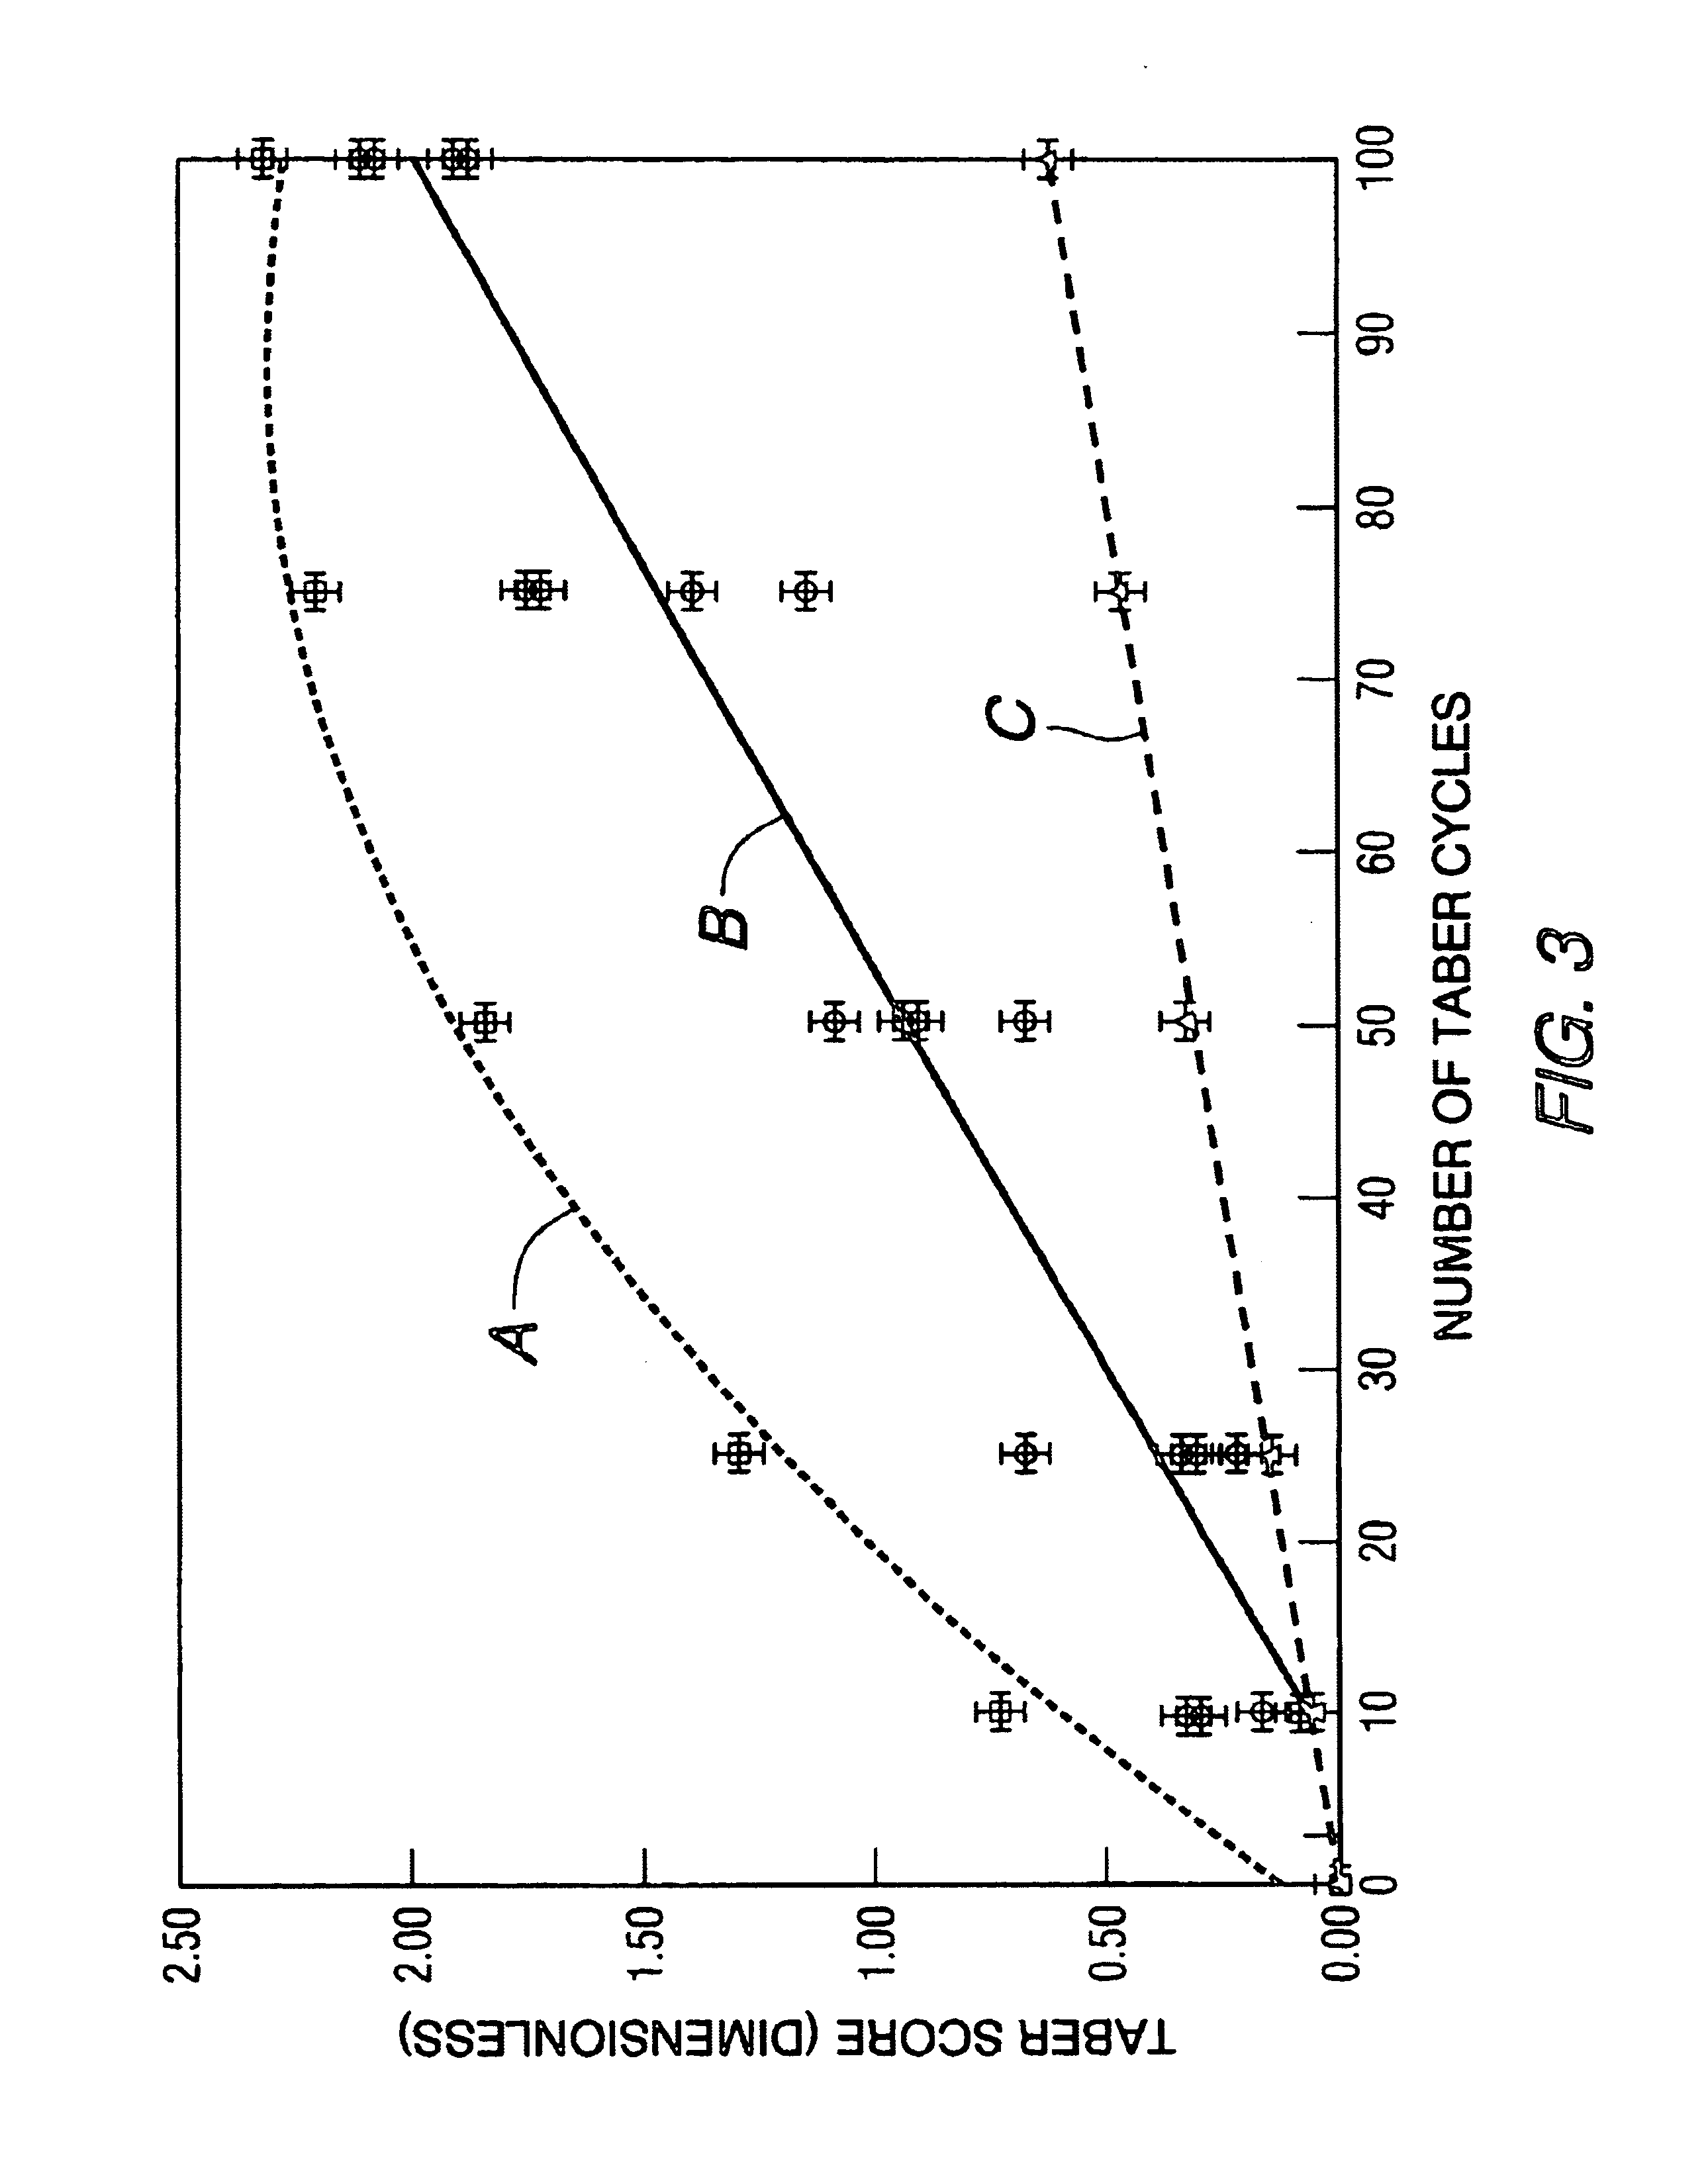 Light-transmitting and/or coated article with removable protective coating and methods of making the same